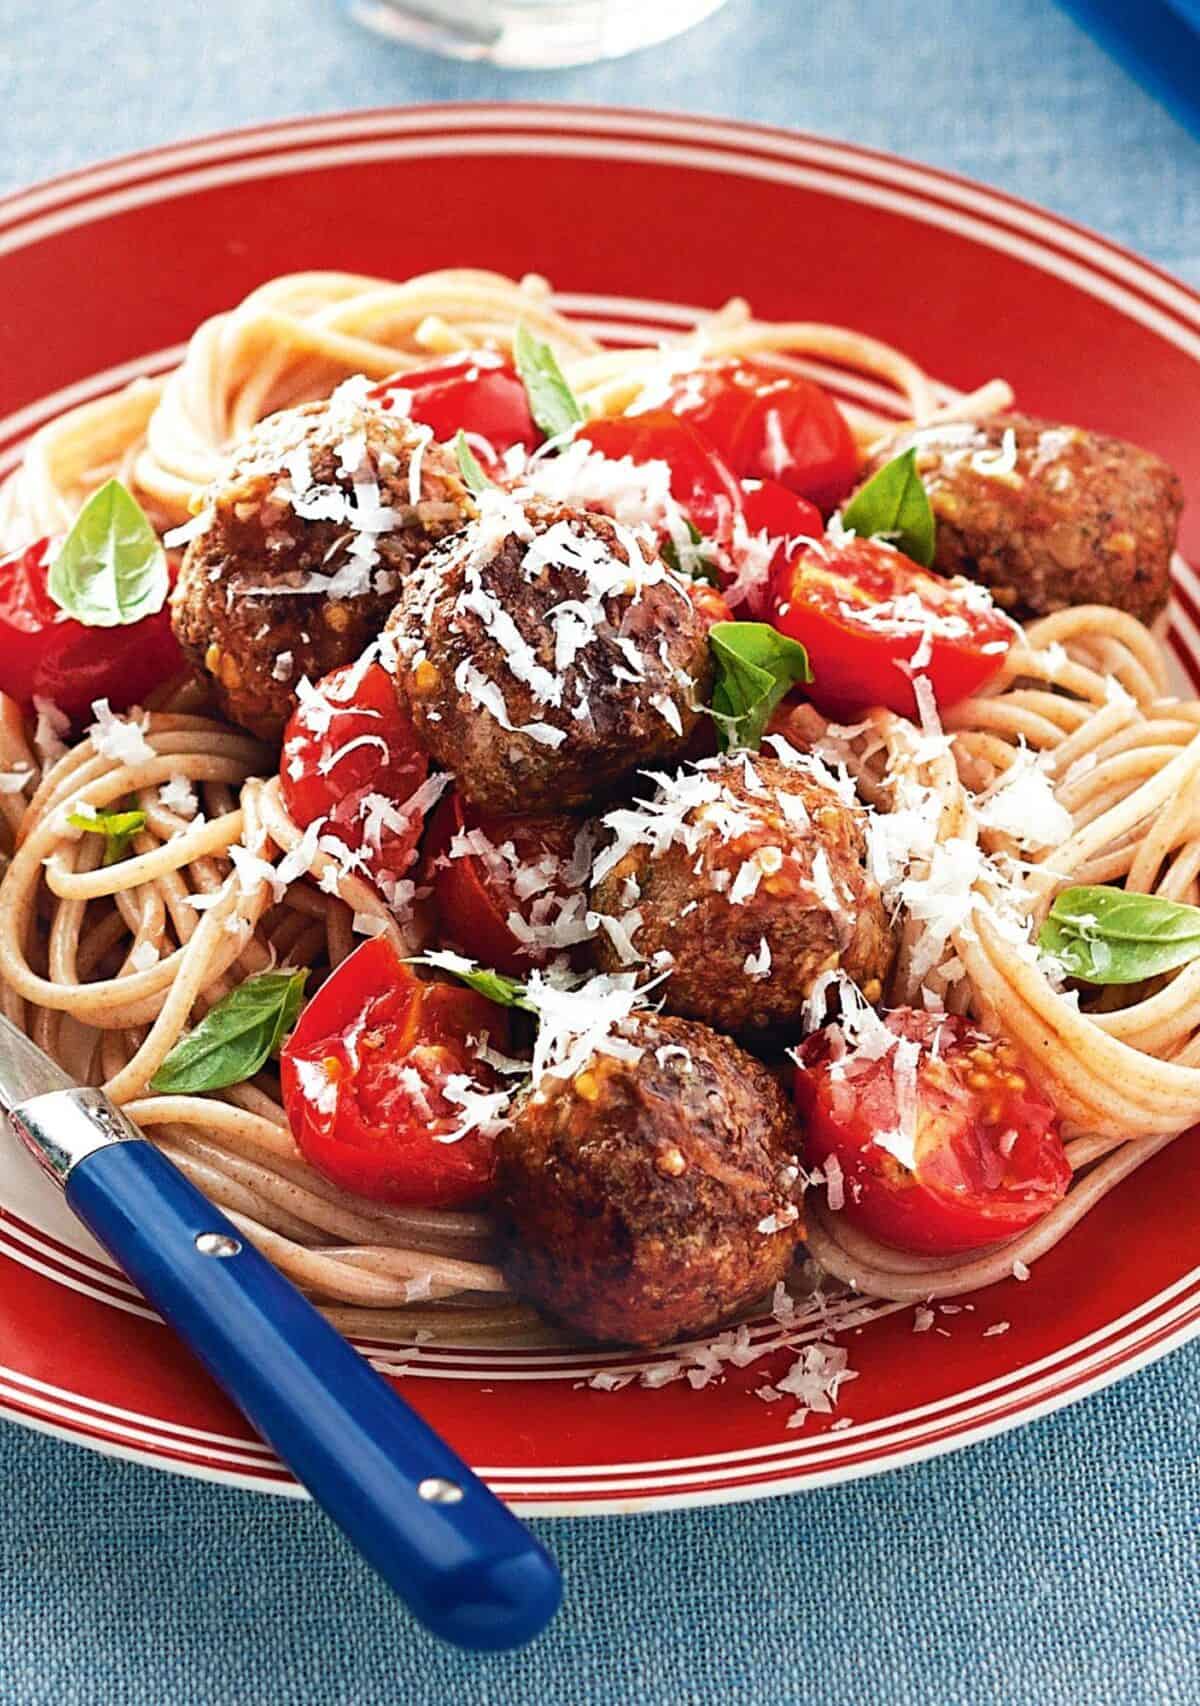  Get ready to satisfy your cravings with these juicy Cherry Tomato Meatballs!